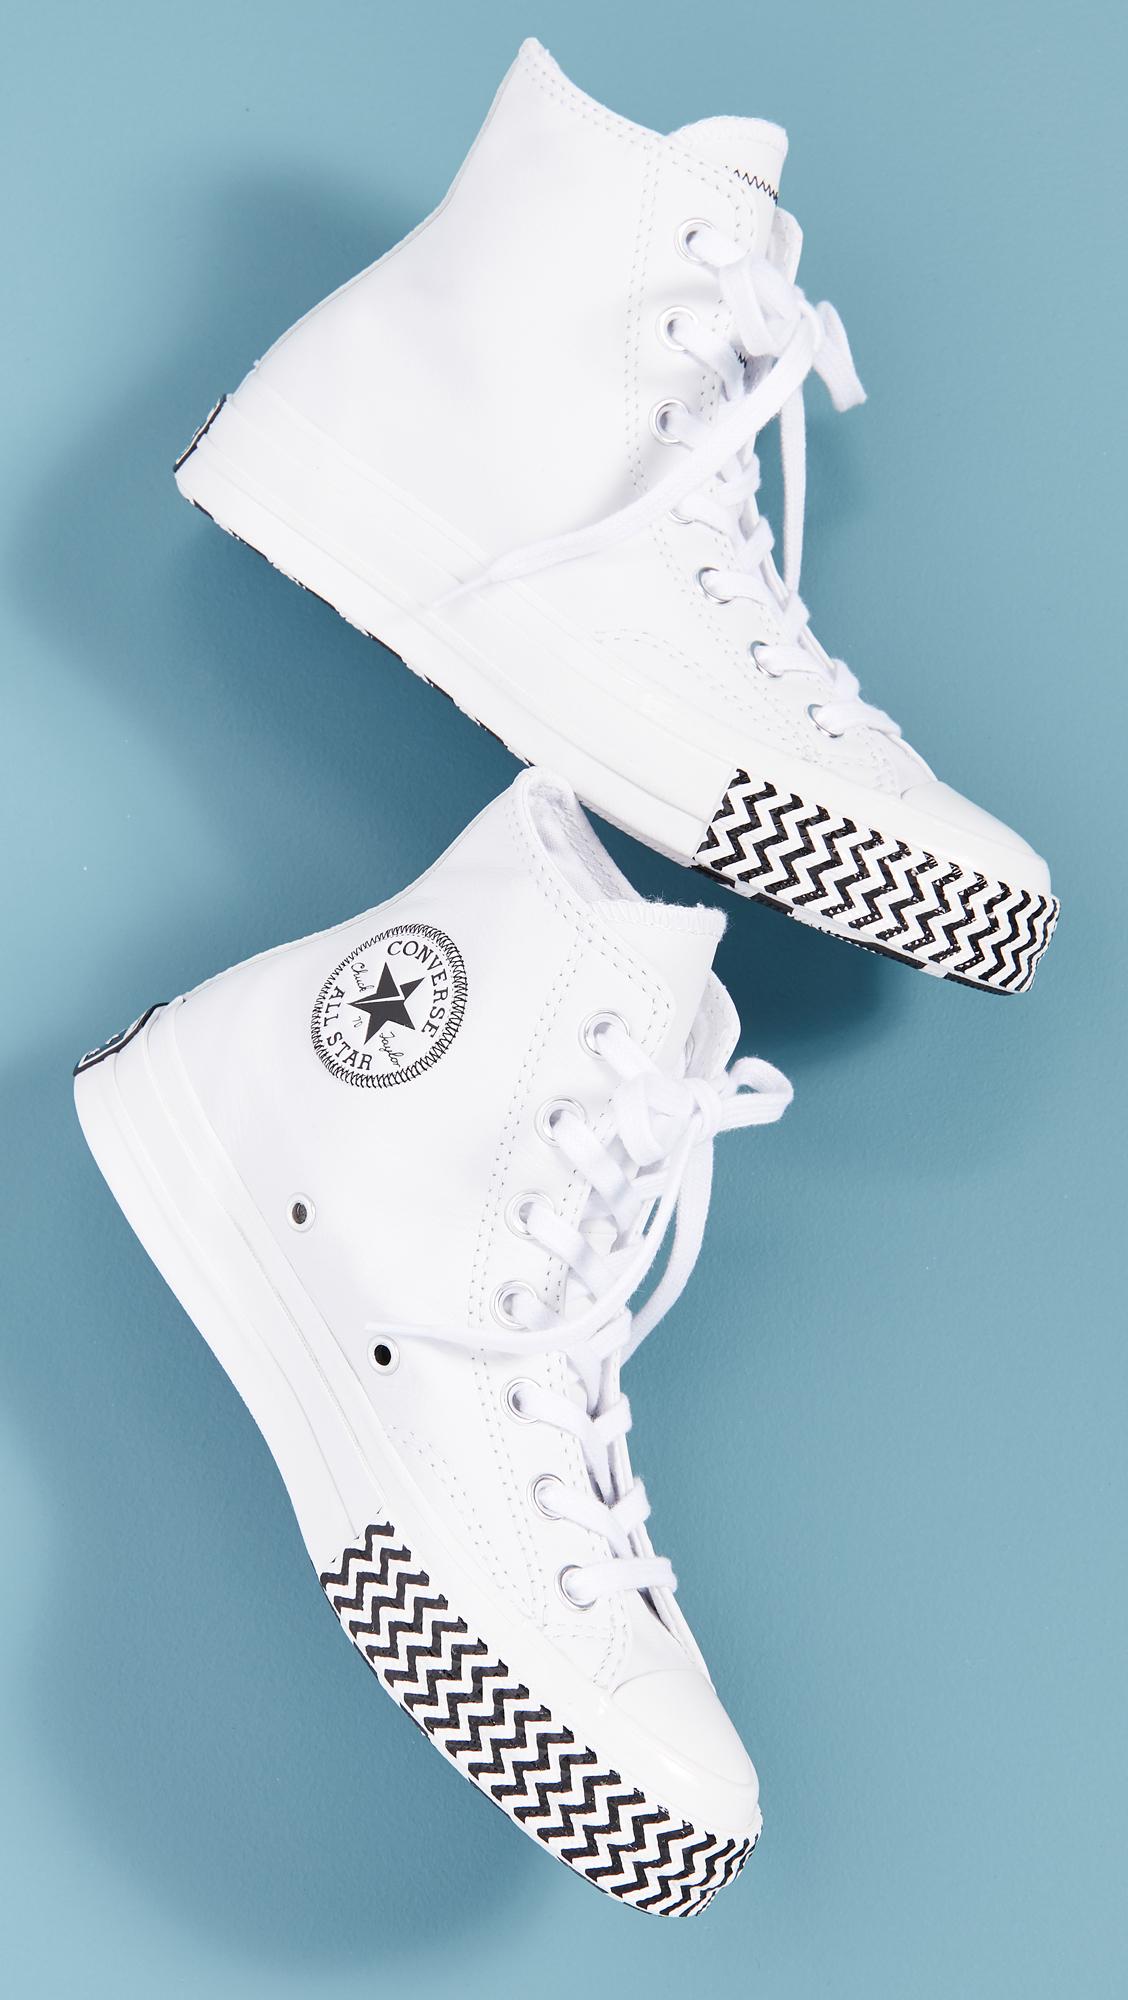 Converse Chuck 70 Mission V High Top Sneakers in White | Lyst